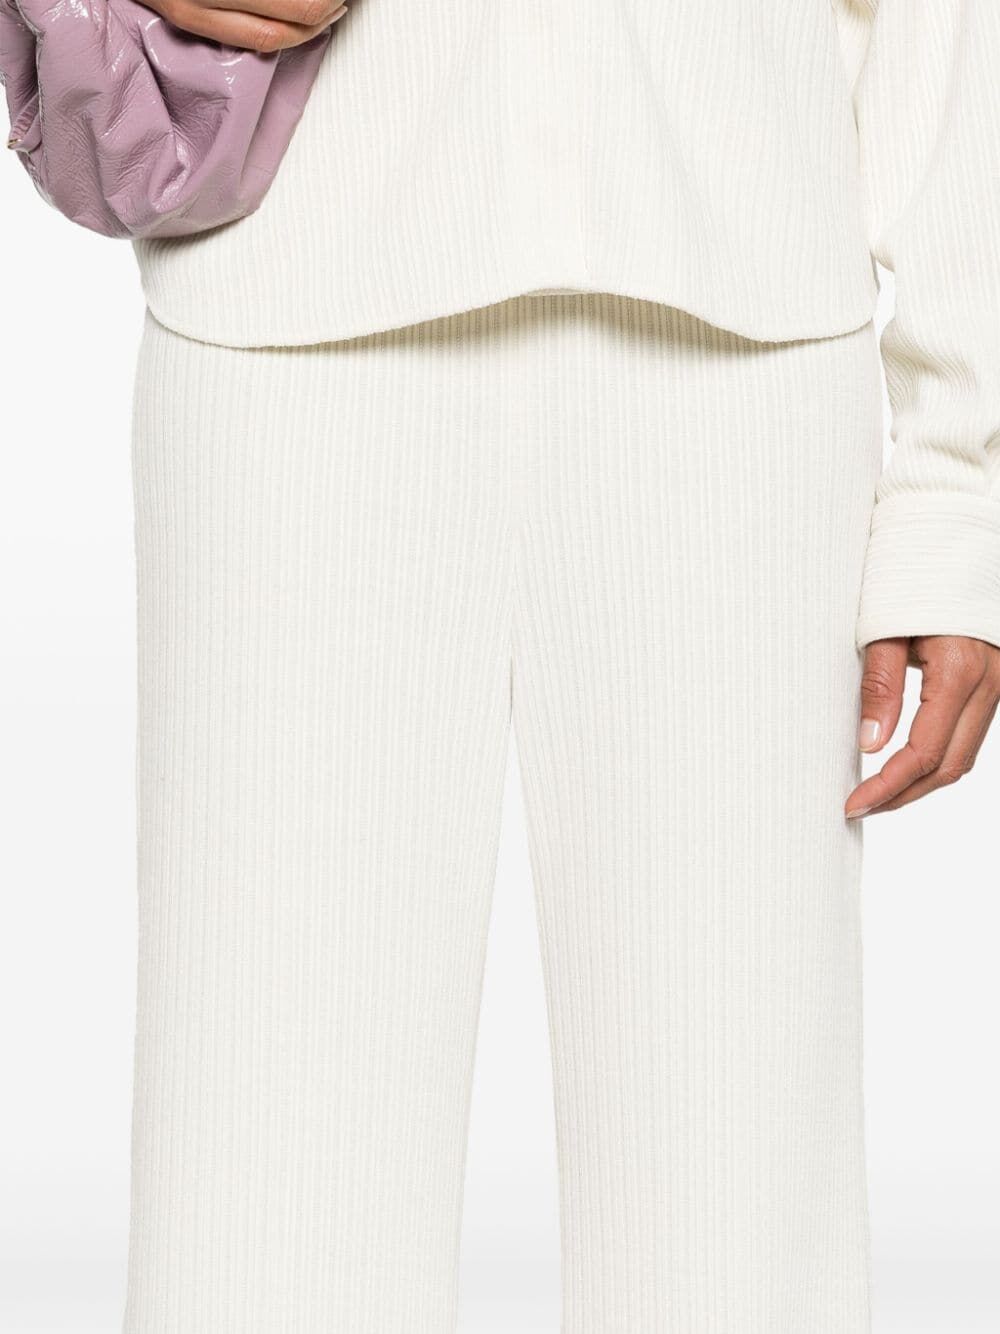 corduroy flared trousers